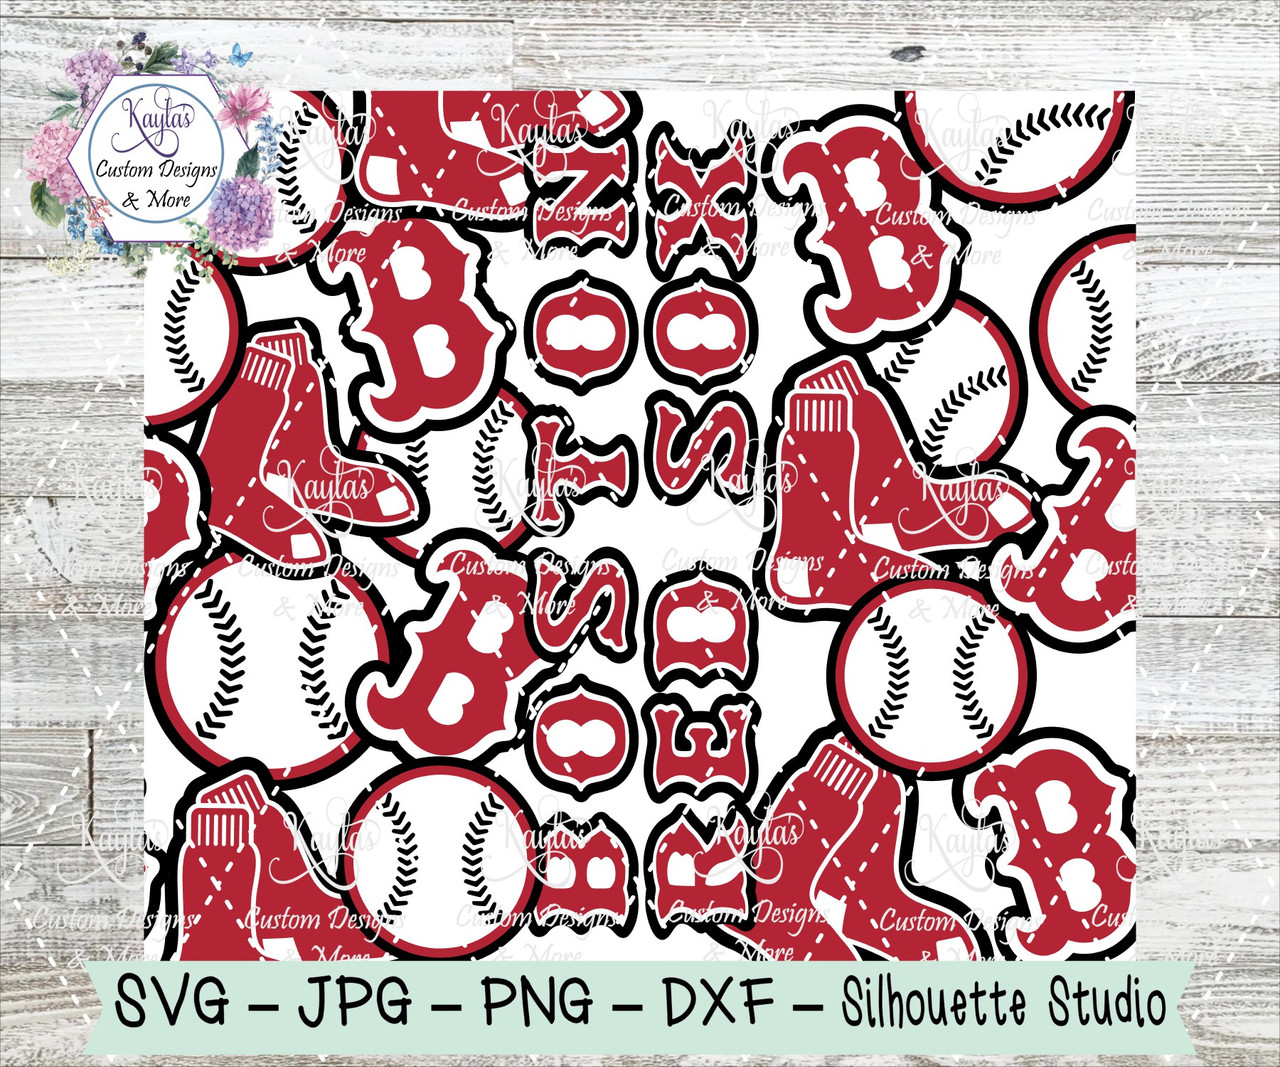 Boston Red Sox Font Free Download